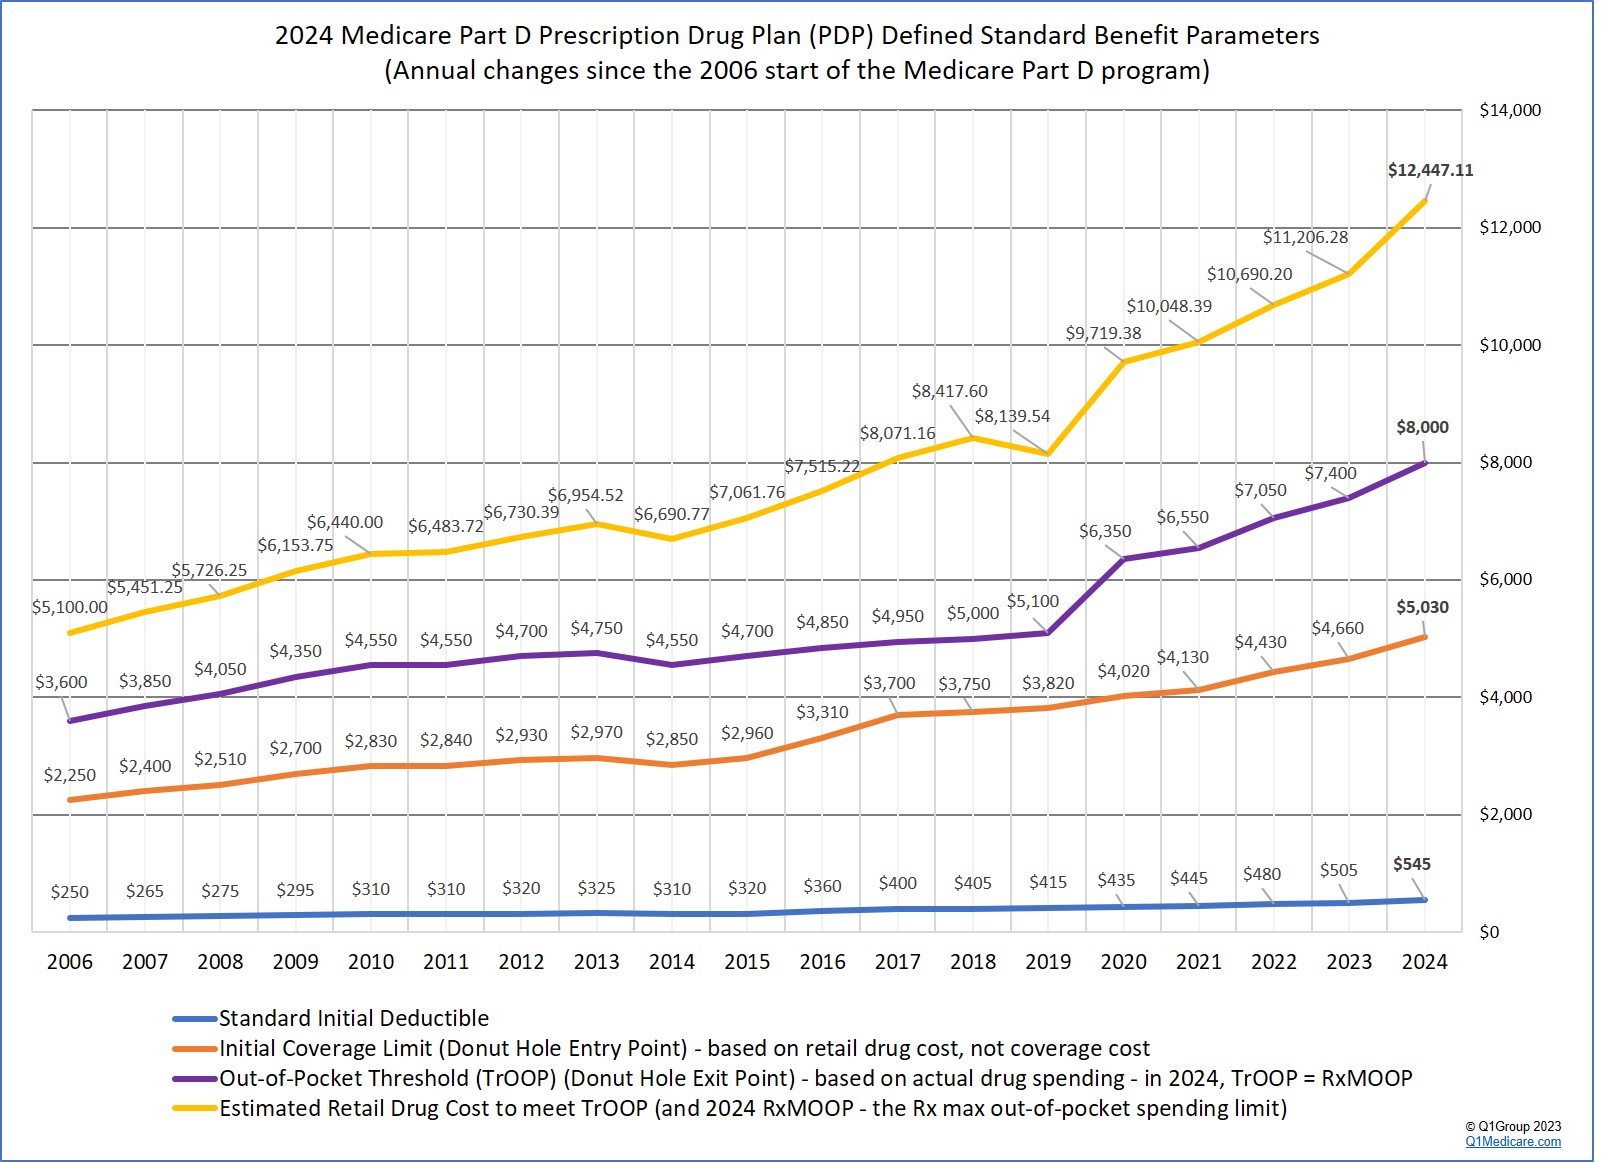 How your Medicare Part D coverage changes over the years